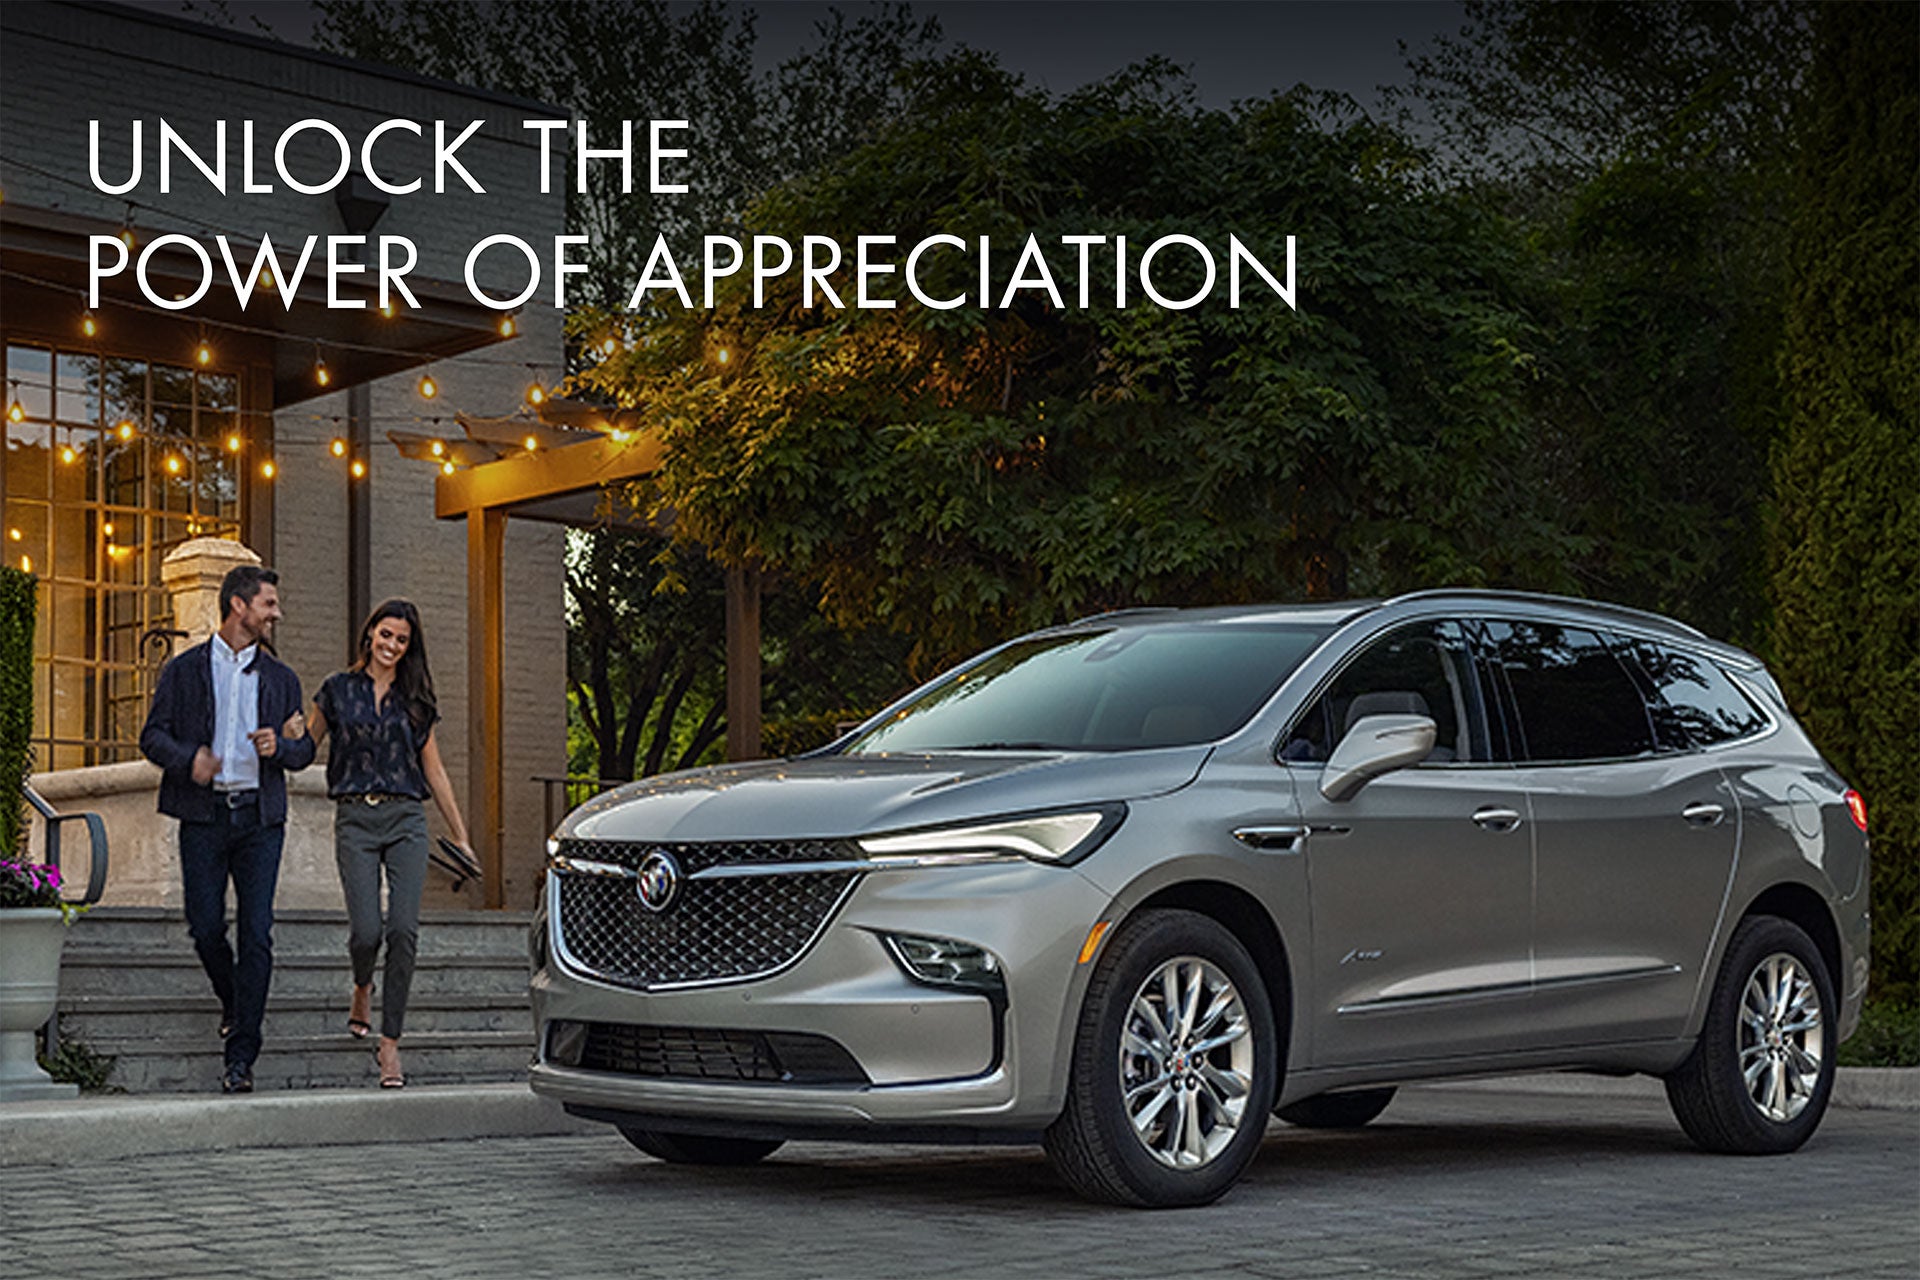 Unlock the power of appreciation | Dutch Miller's Beckley Automall in Beckley WV